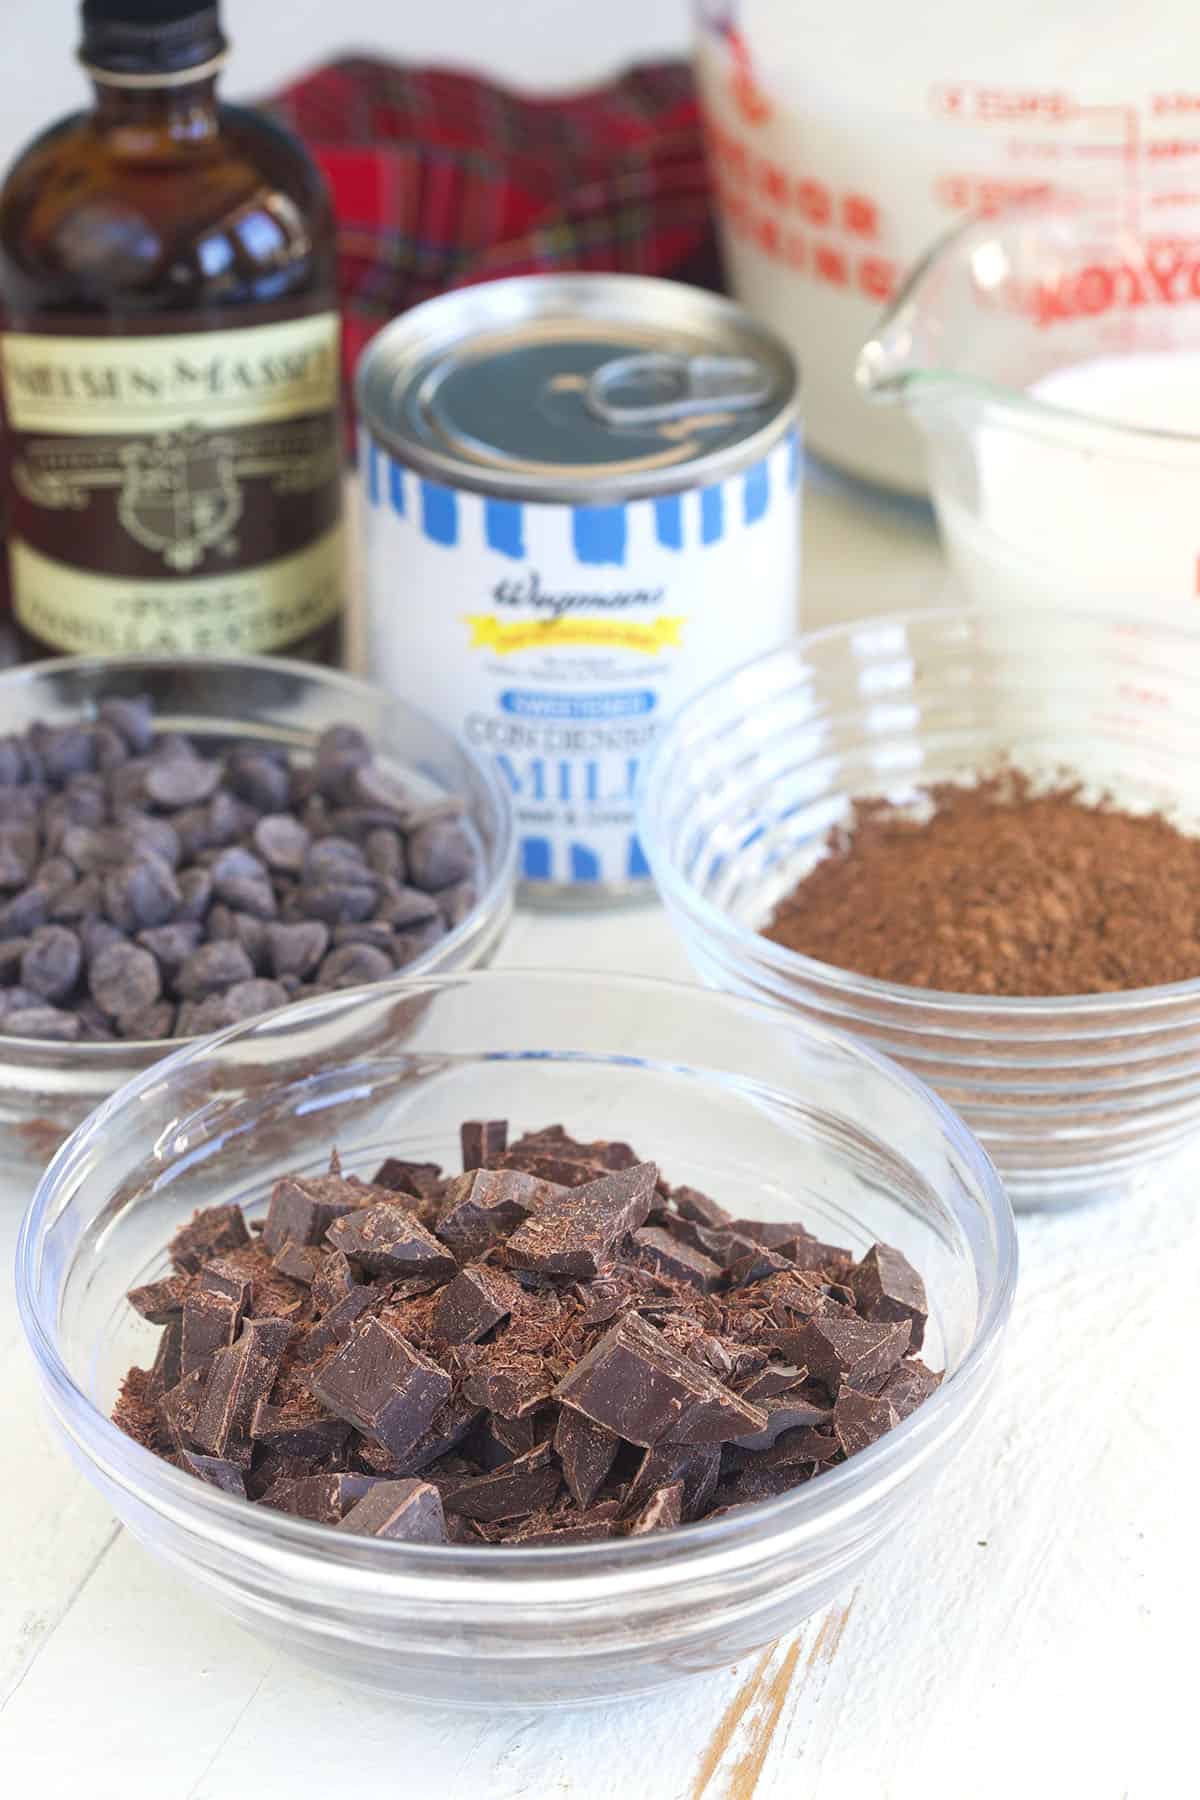 The ingredients for Crockpot hot chocolate are placed on a white surface. 